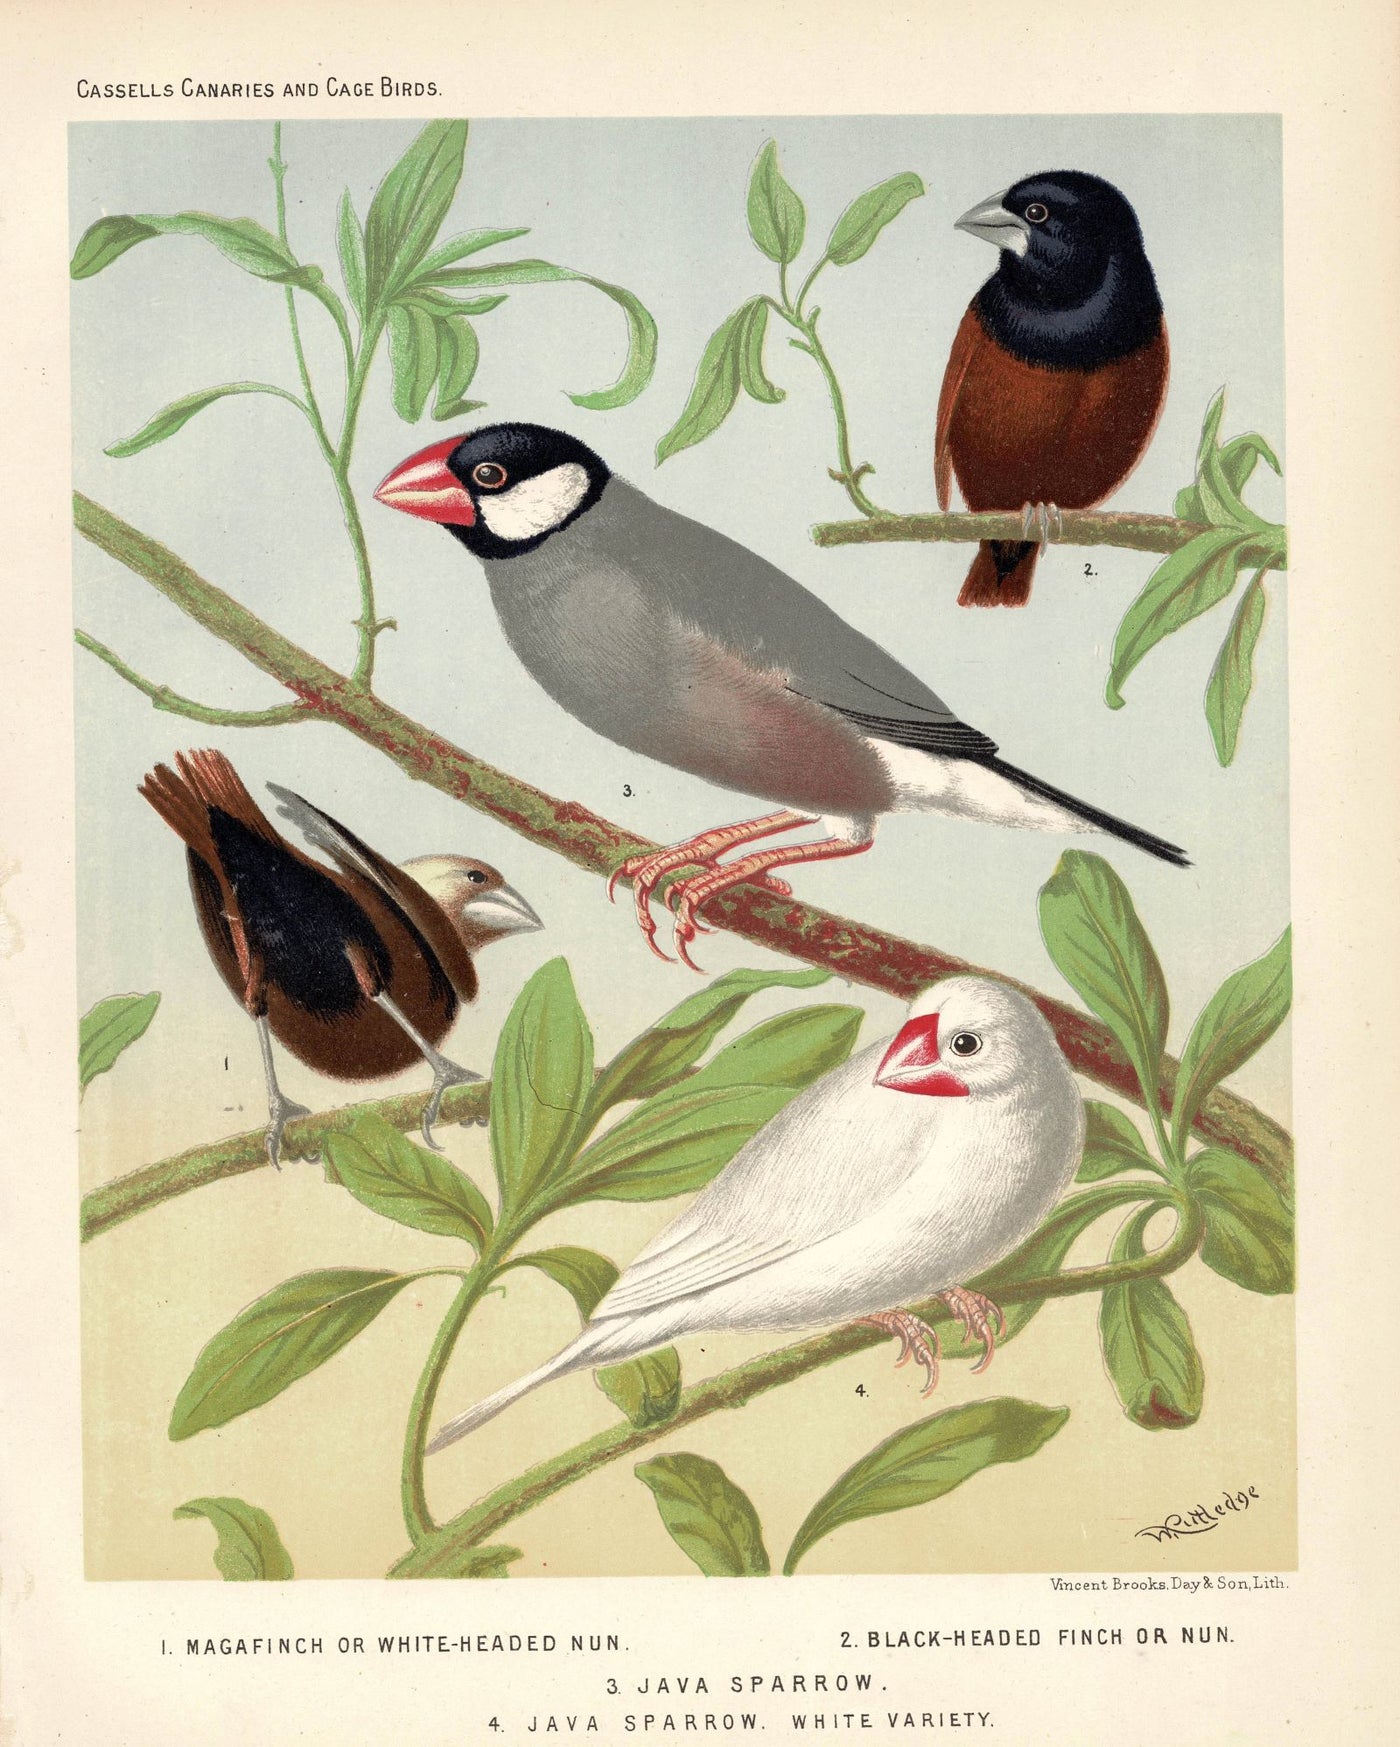 Magafinch and Java Sparrow antique print published 1878